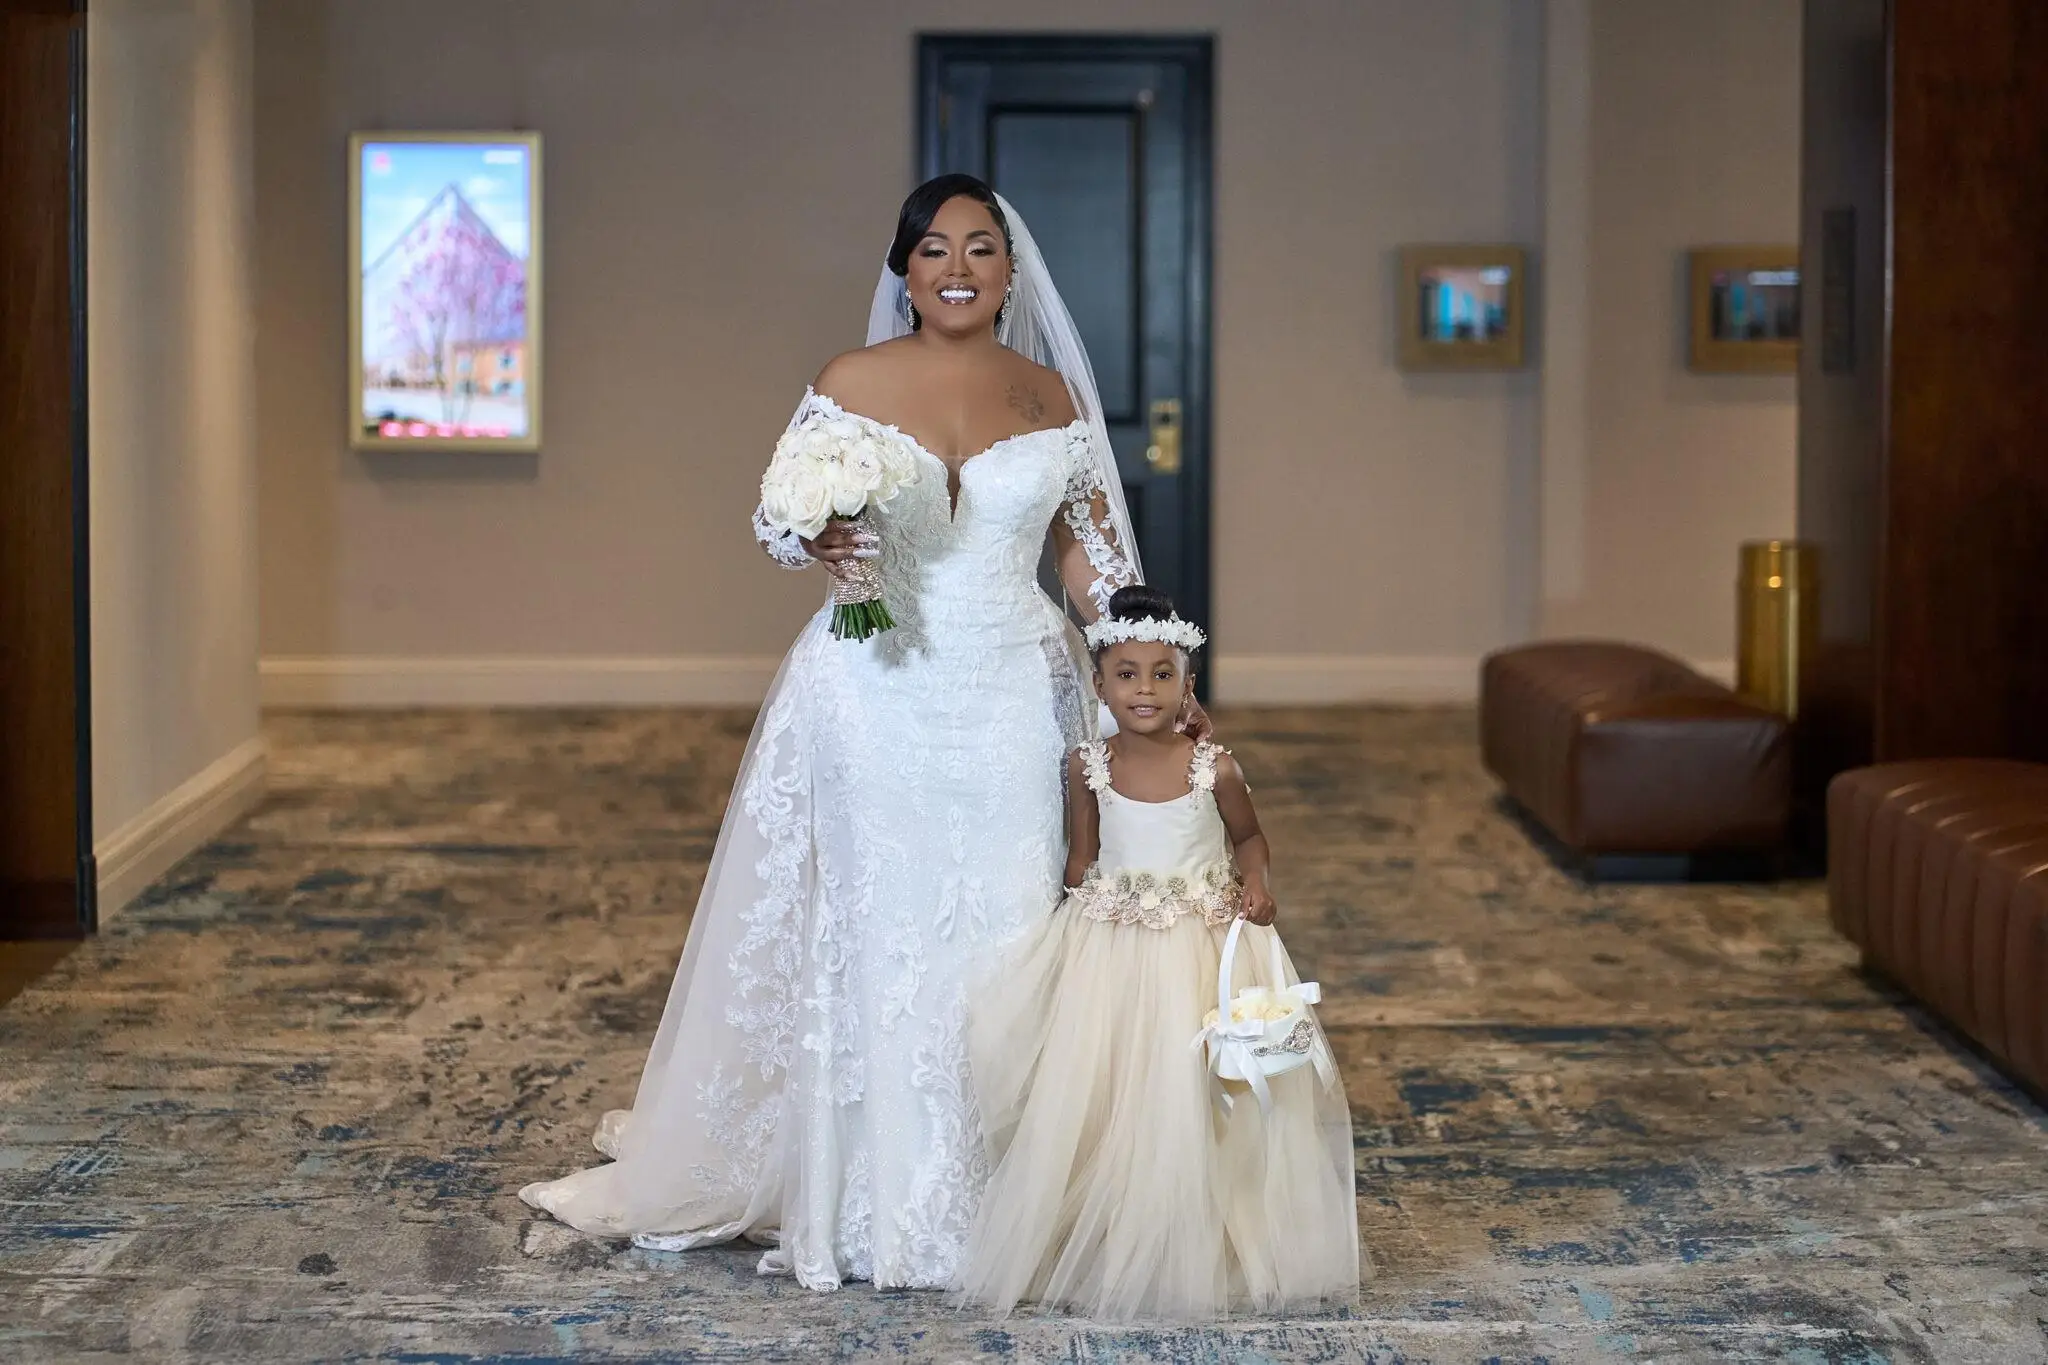 ASO EBI African High Split Overskirt Wedding Dress With Beaded Appliques, One  Shoulder, Keyhole Neckline, And Slit Plus Size Bridal Gown BC14877 2023  From Babynice666, $251.53